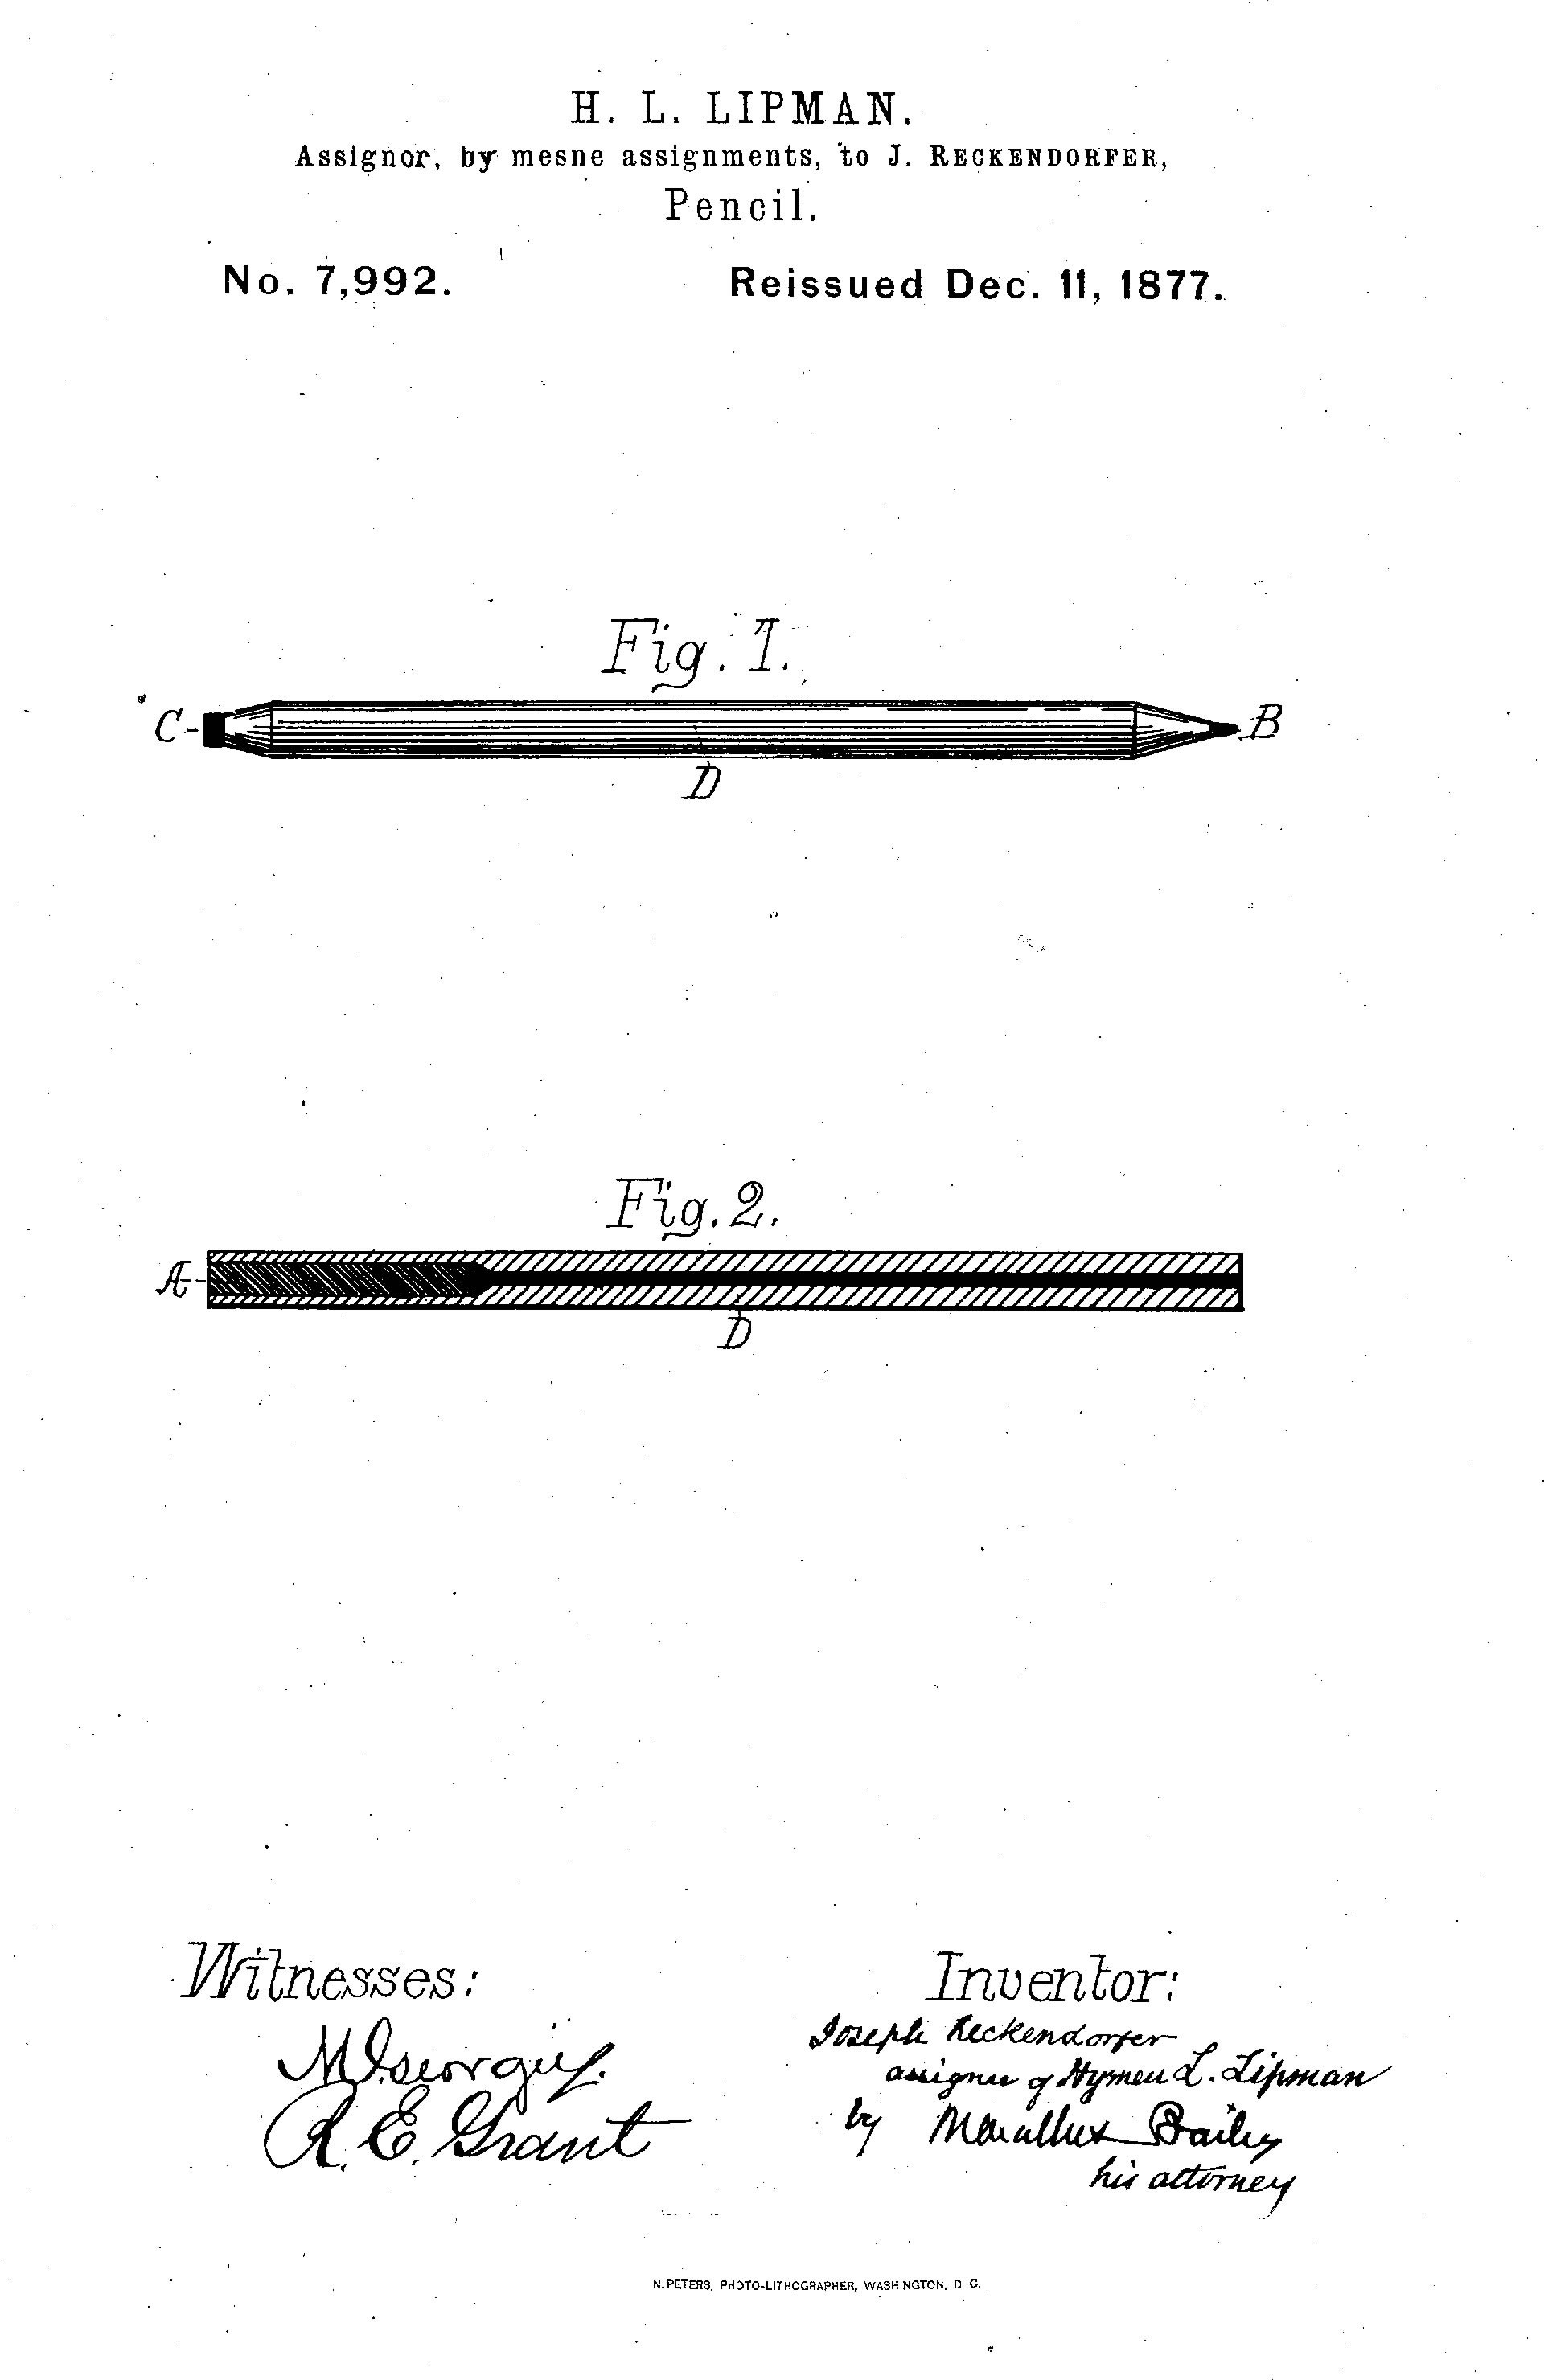 Drawings from the official US Patent for the pencil with eraser